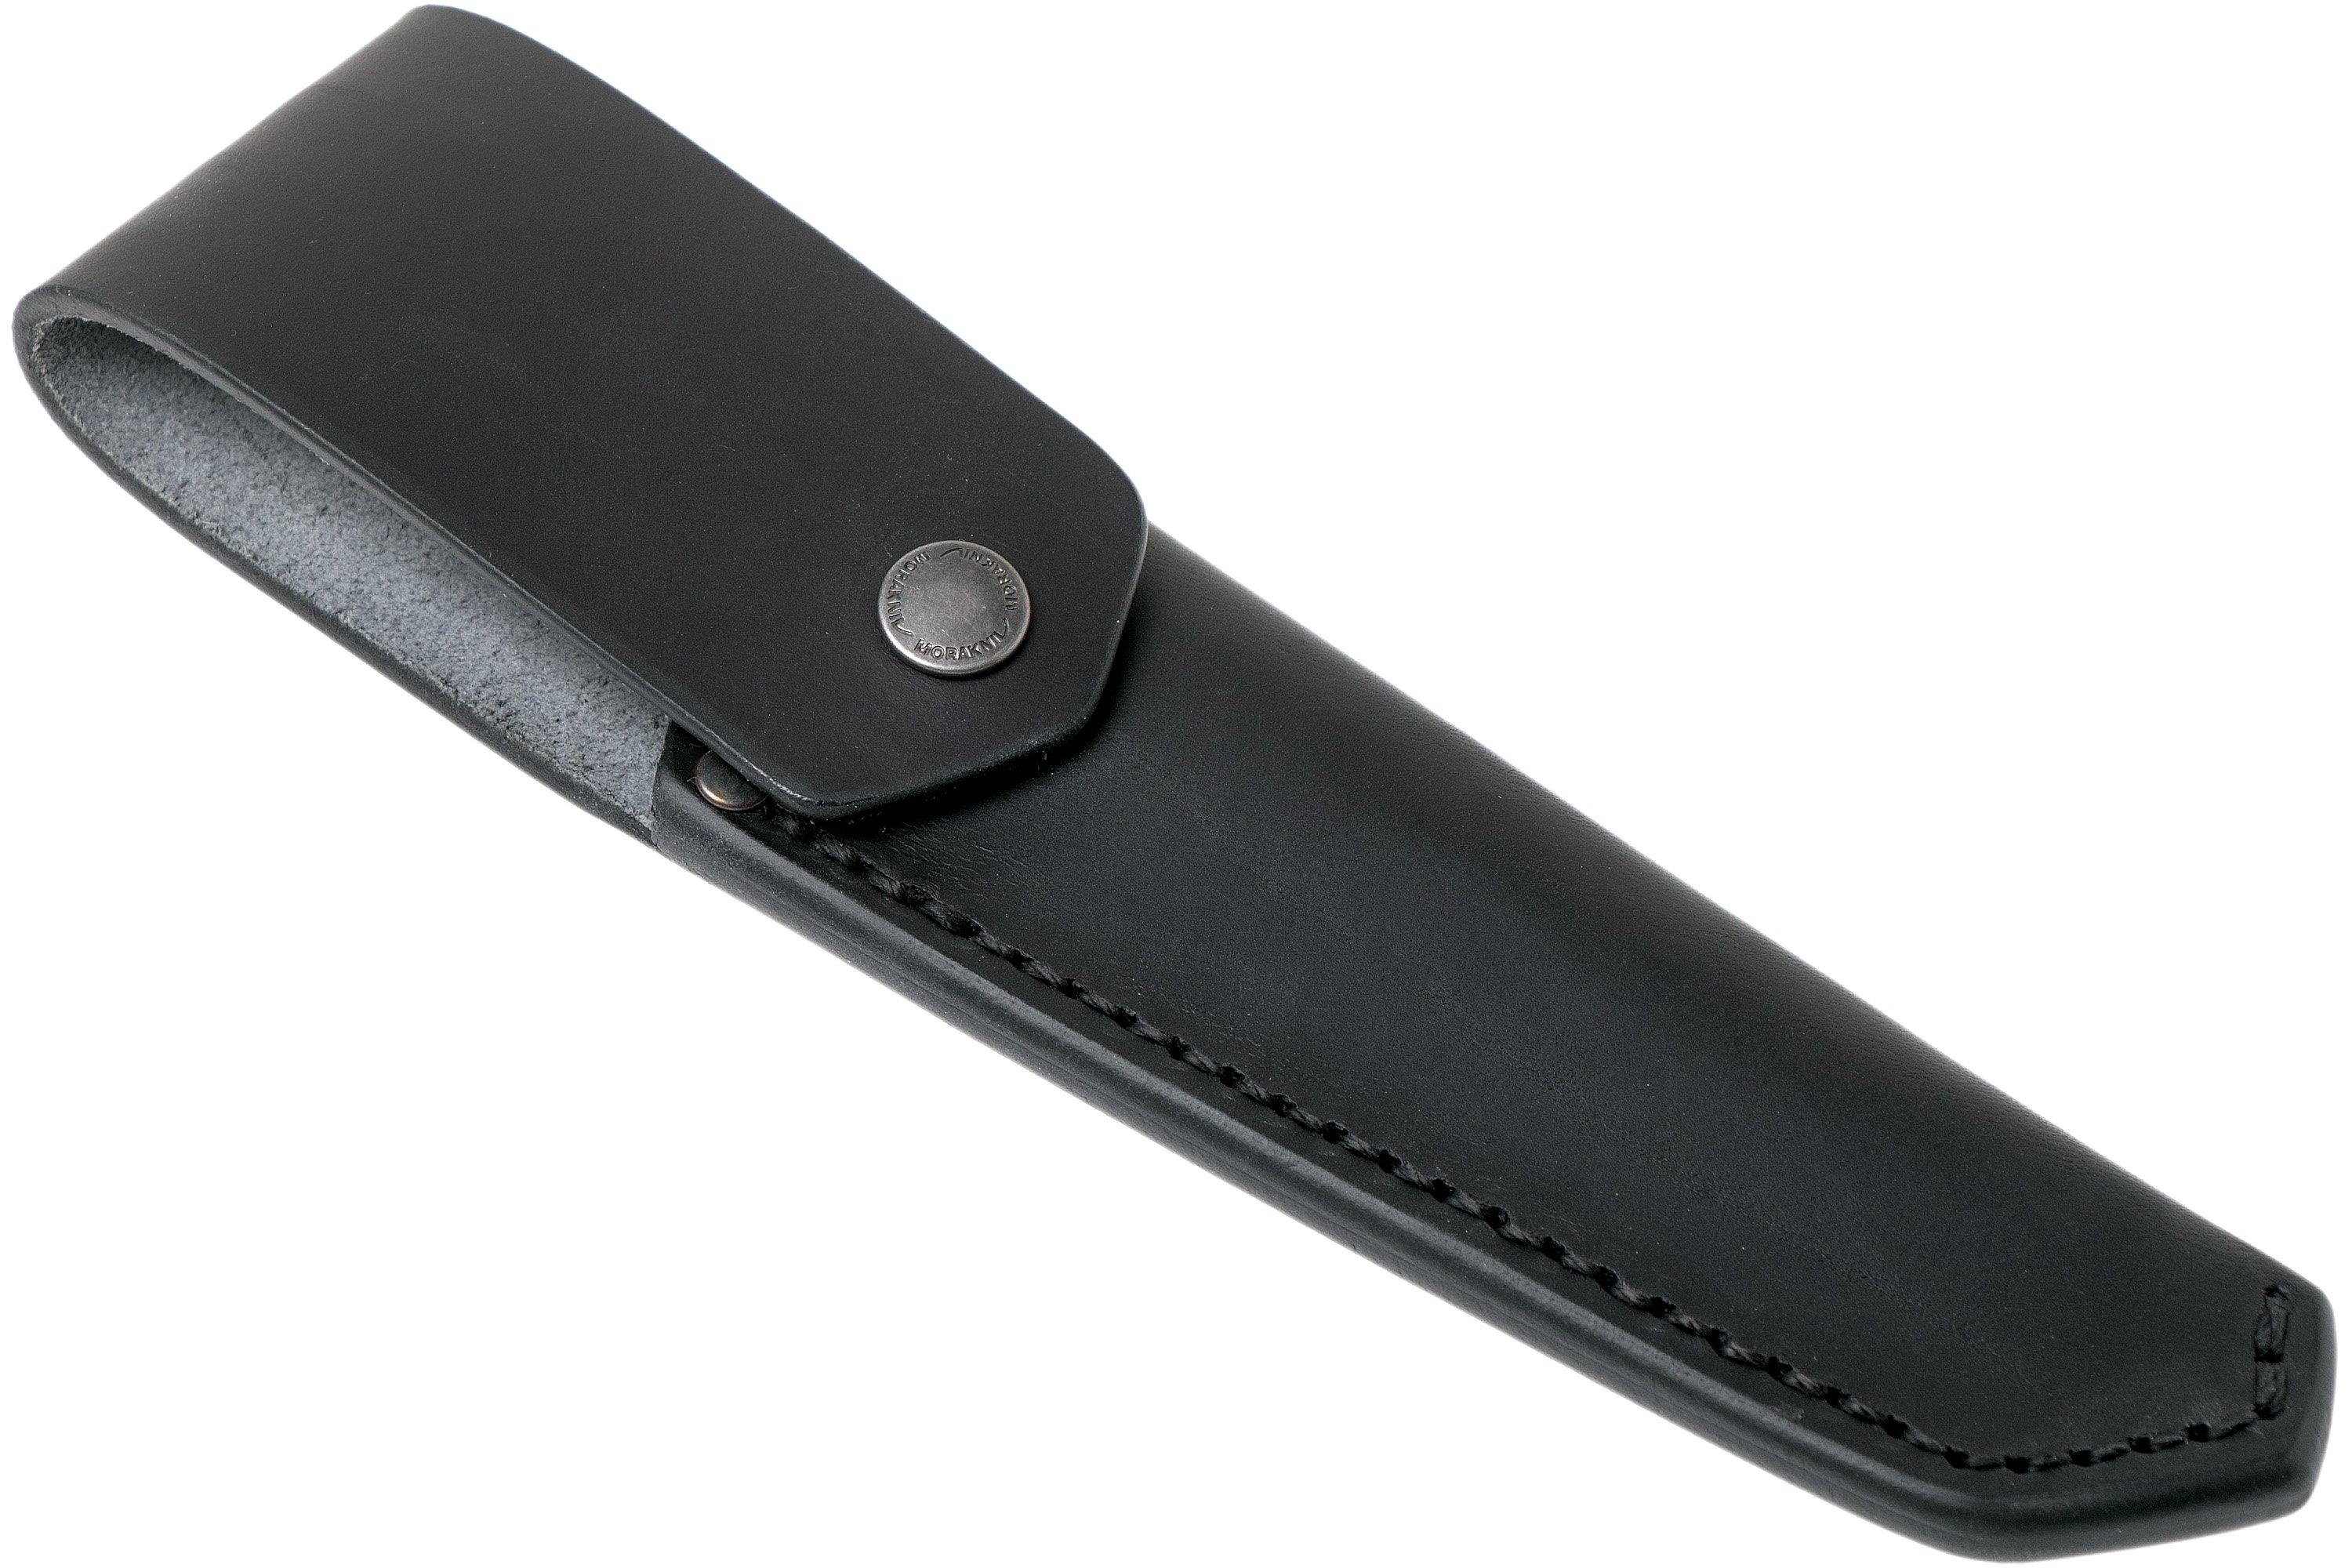 Mora leather sheath for the Garberg 12000 | Advantageously shopping at ...